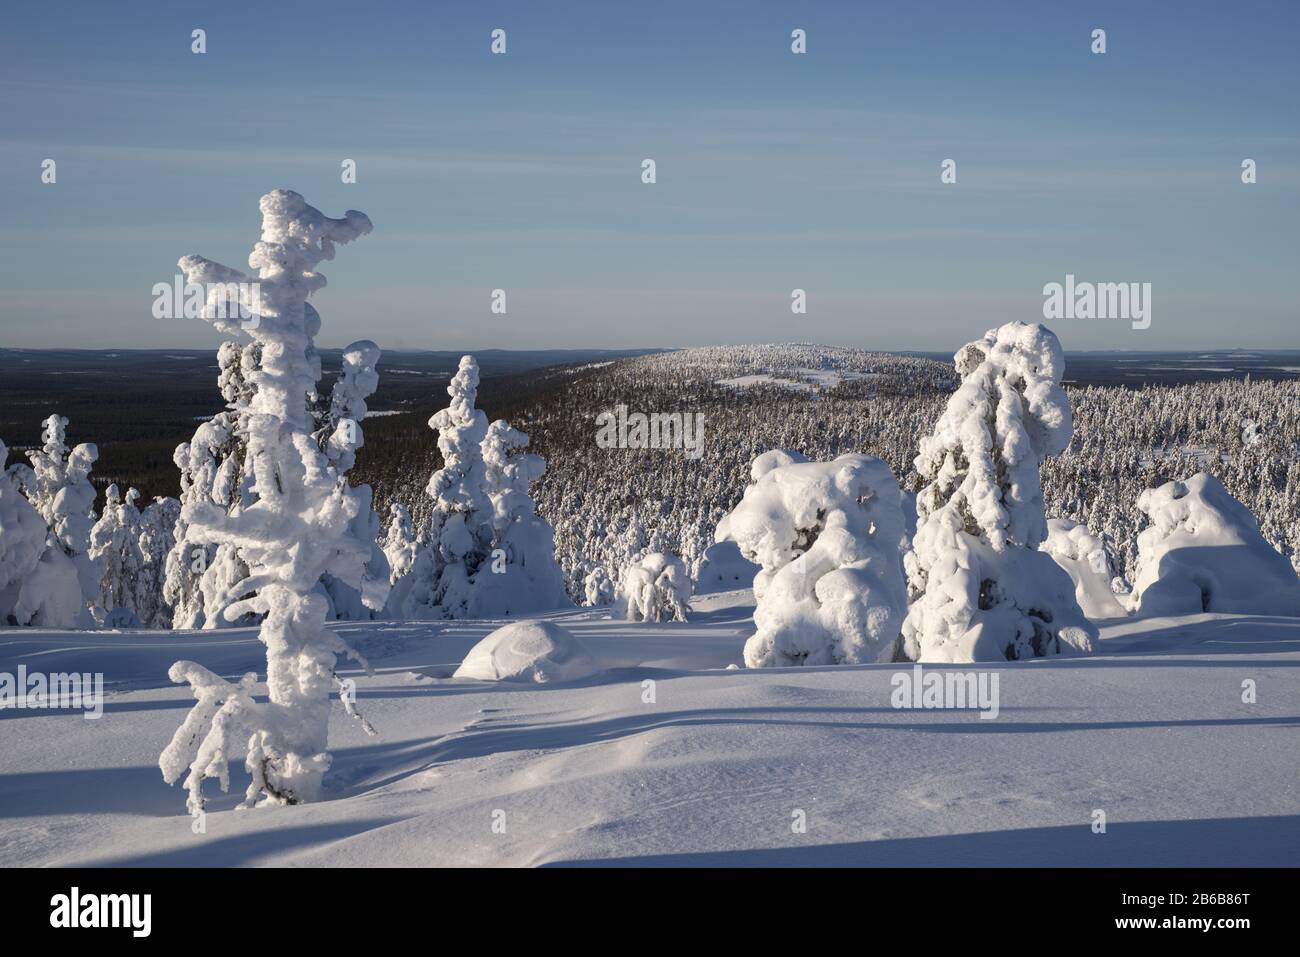 Snow covered trees in Lapland, Finland create a wonderful and beautiful winter wonderland landscape. They're called popcorn trees. Stock Photo